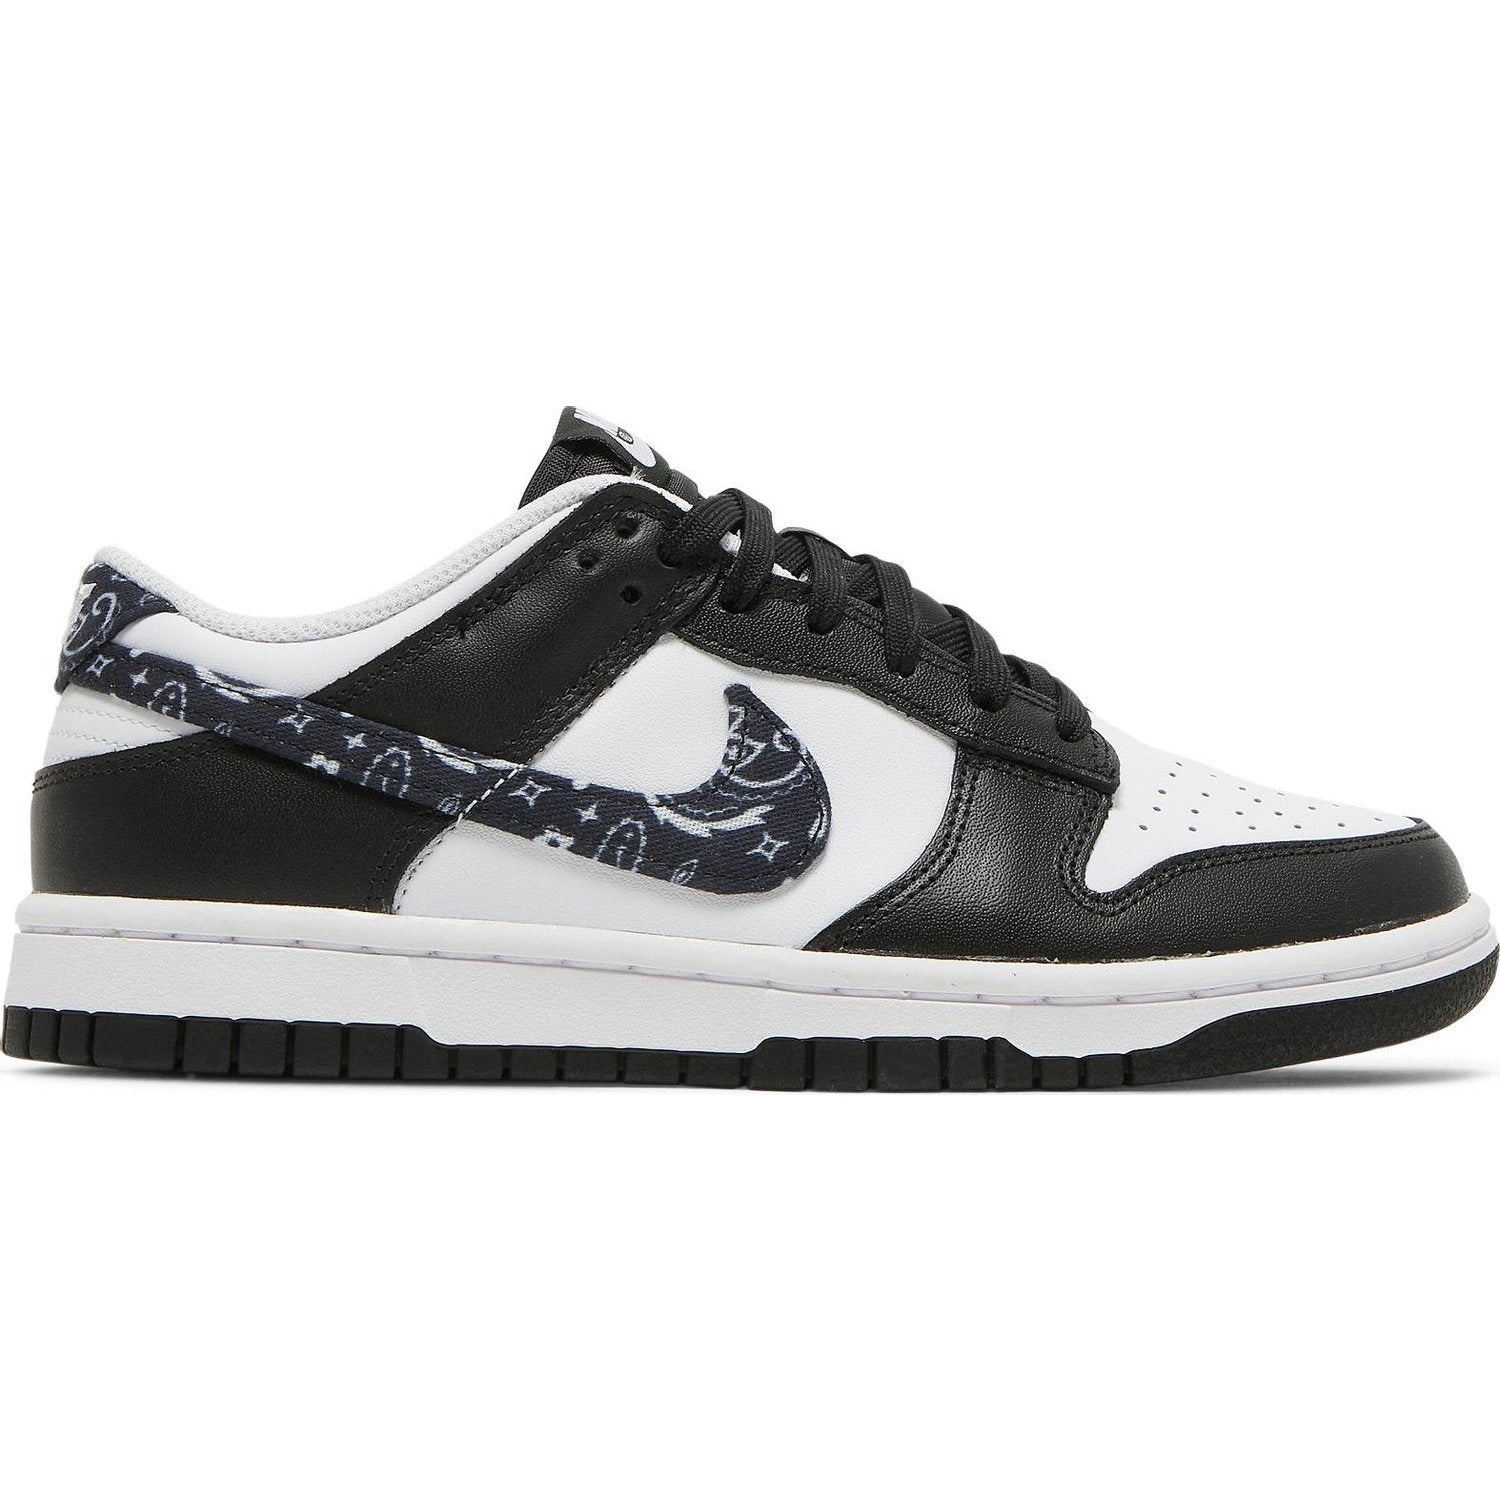 Nike Dunk Low Essential "Paisley Black" - Clipped AU